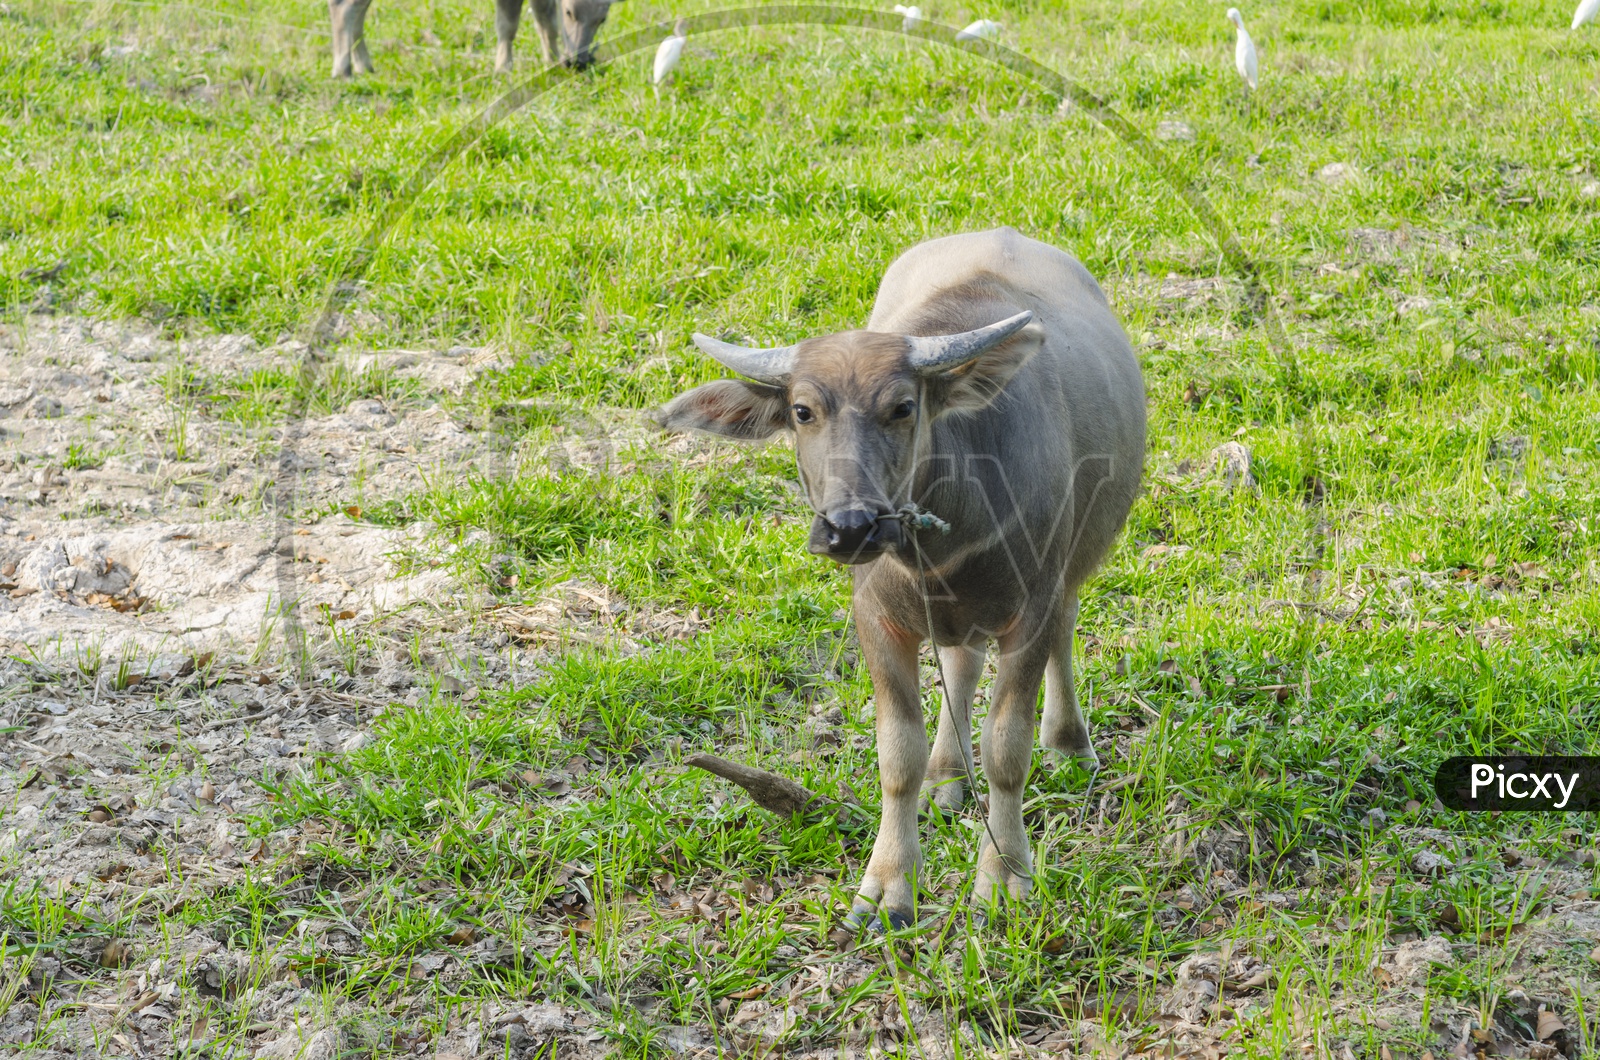 Water Buffalo in Agriculture Fields, Thailand